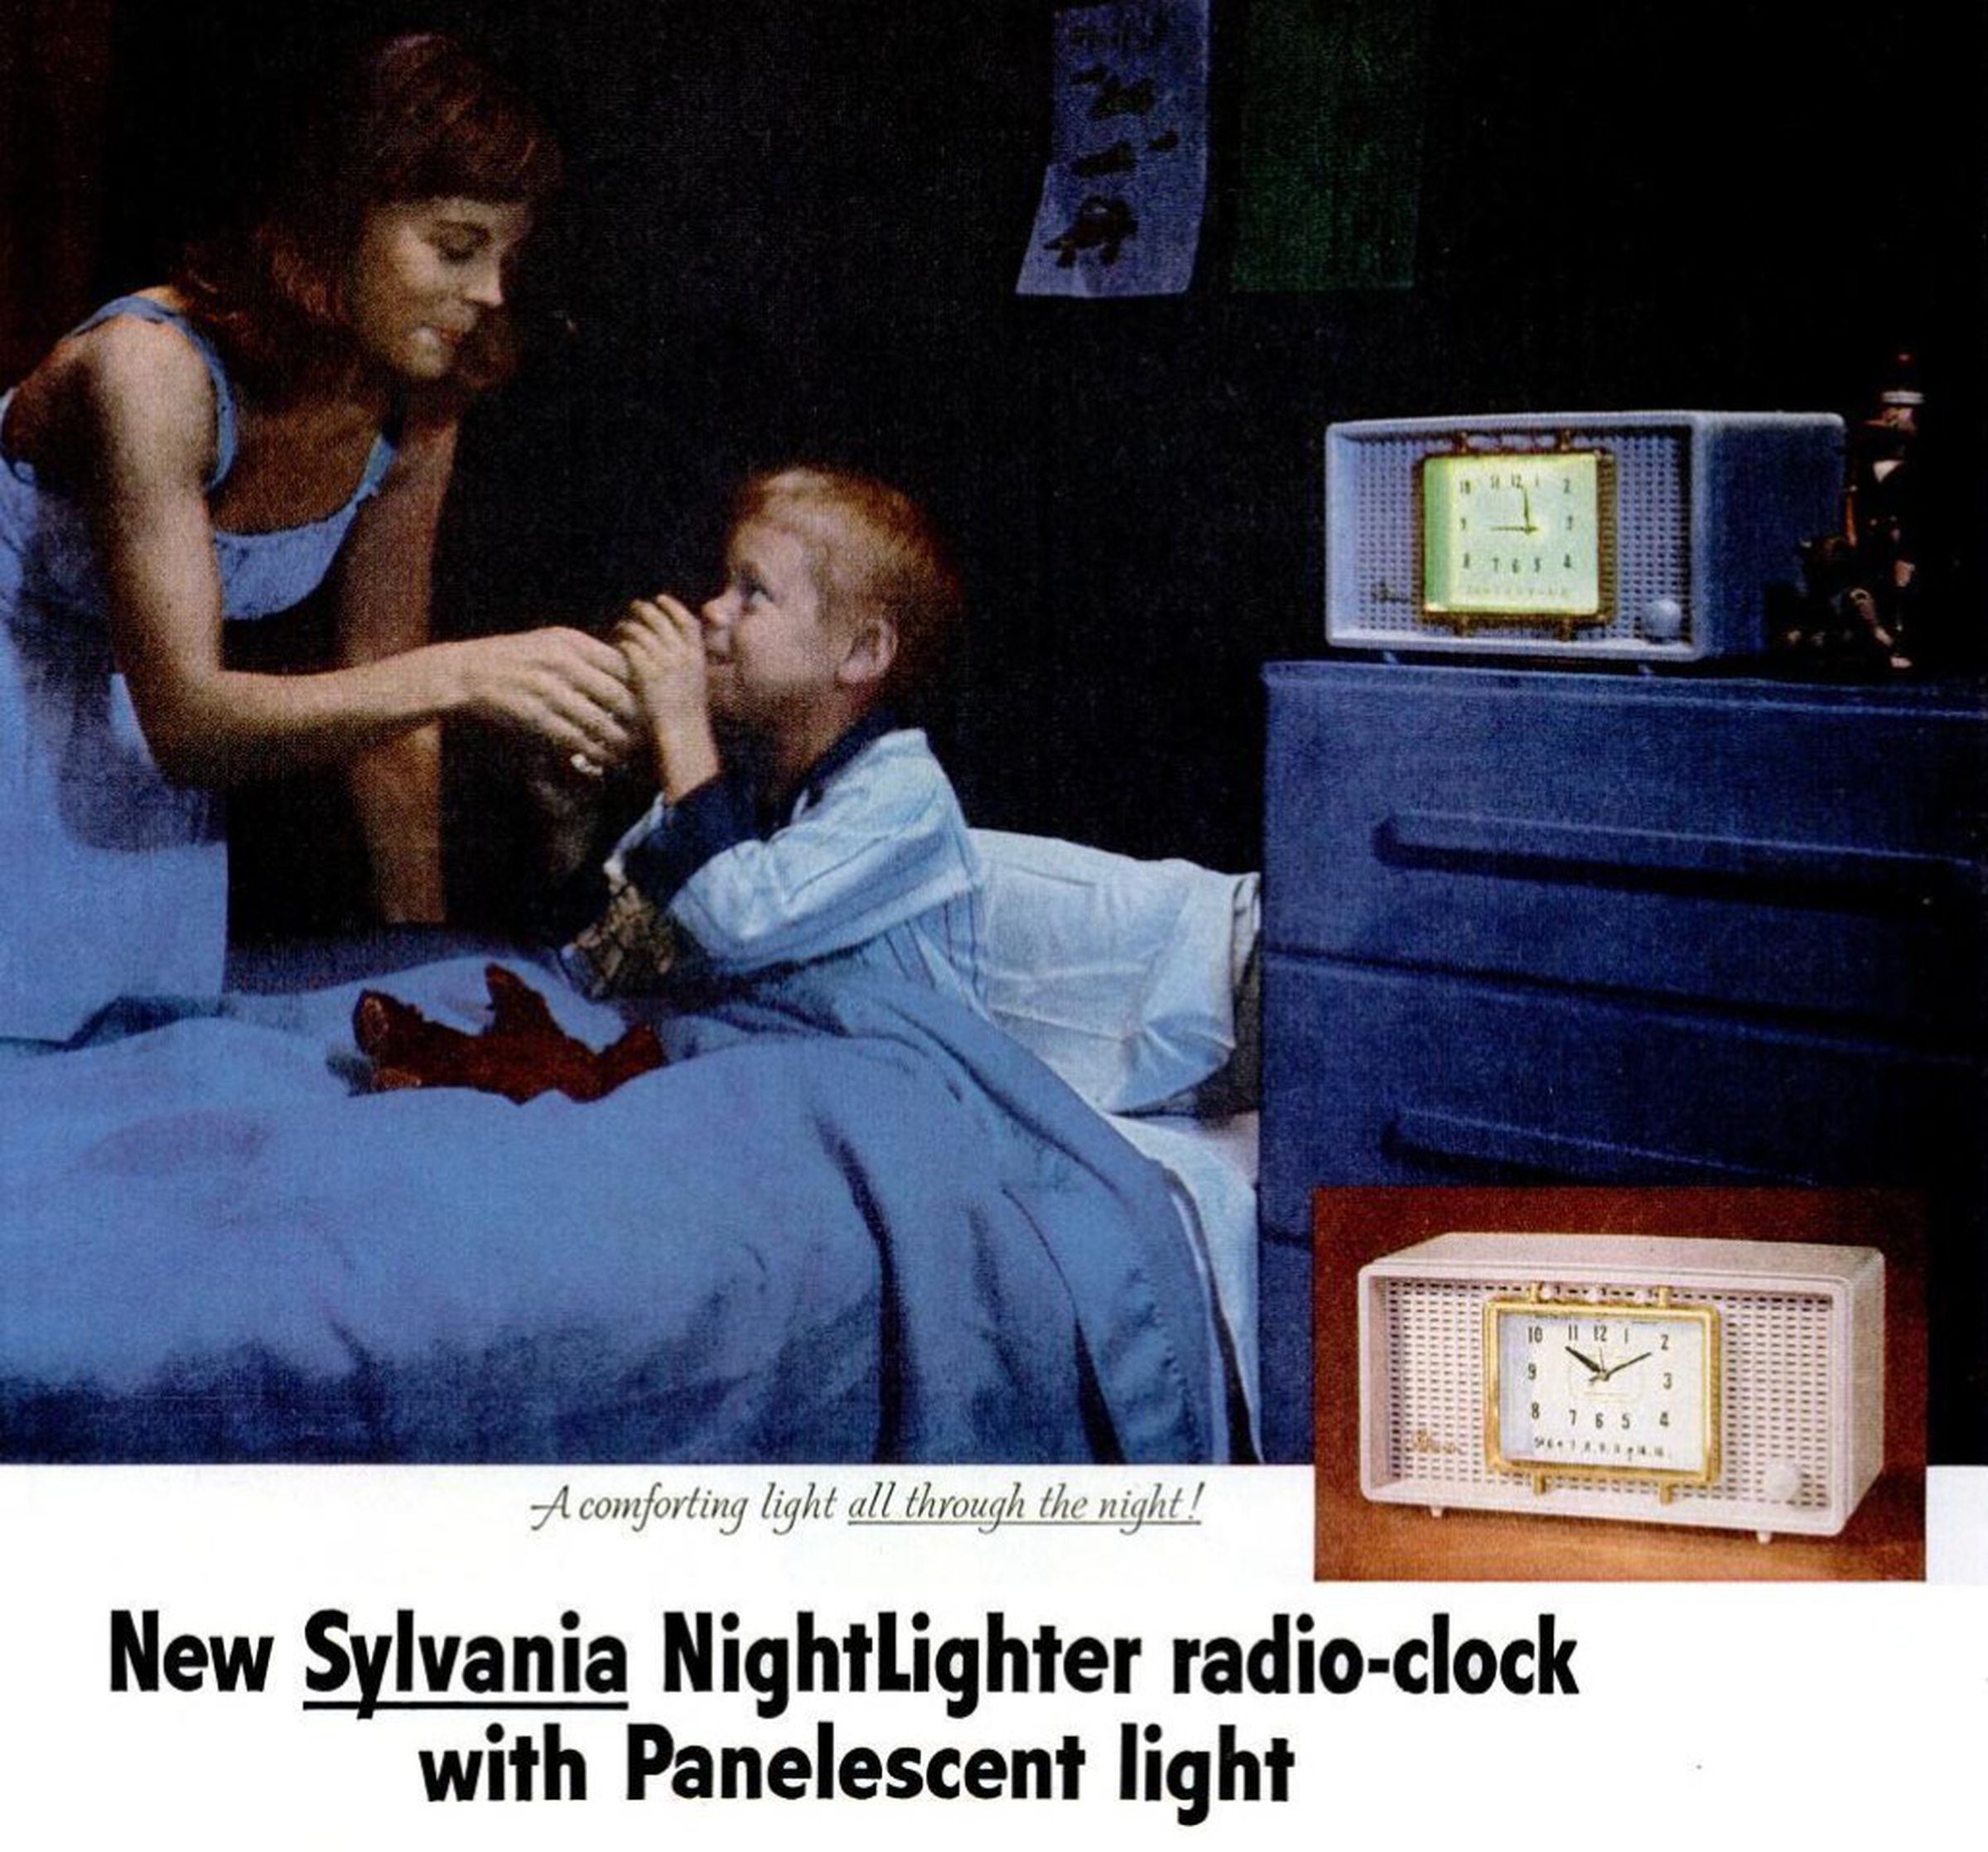 A woman gives her kid in bed a drink of water, next to a large vintage radio alarm clock with an analog face, lit up blue.